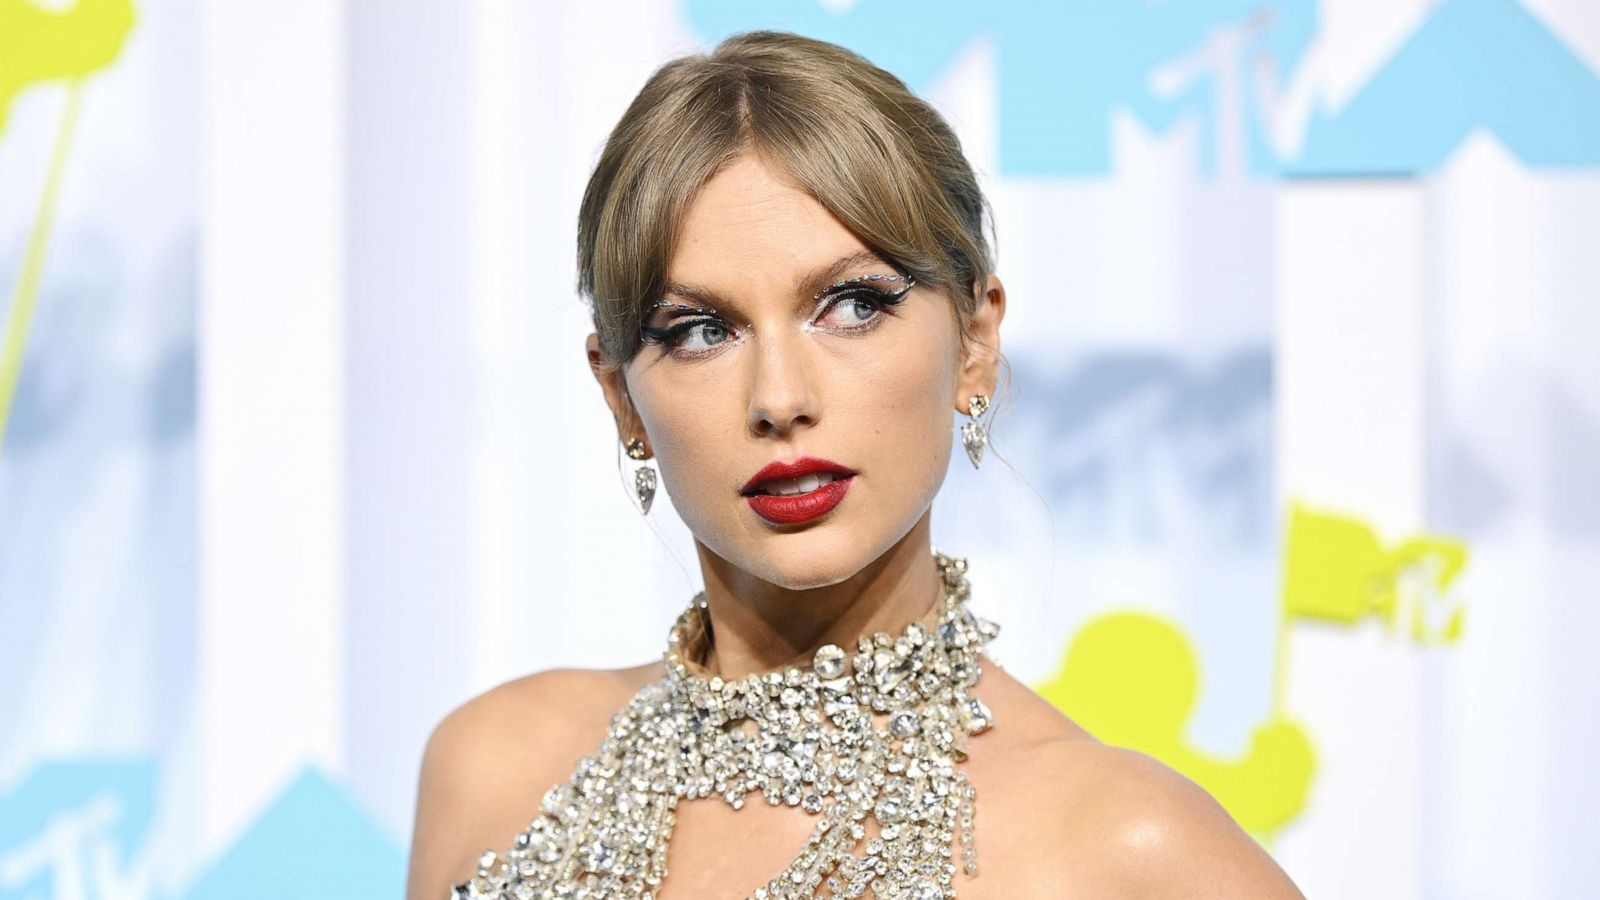 Ticketmaster cancels public sale of Taylor Swift concert